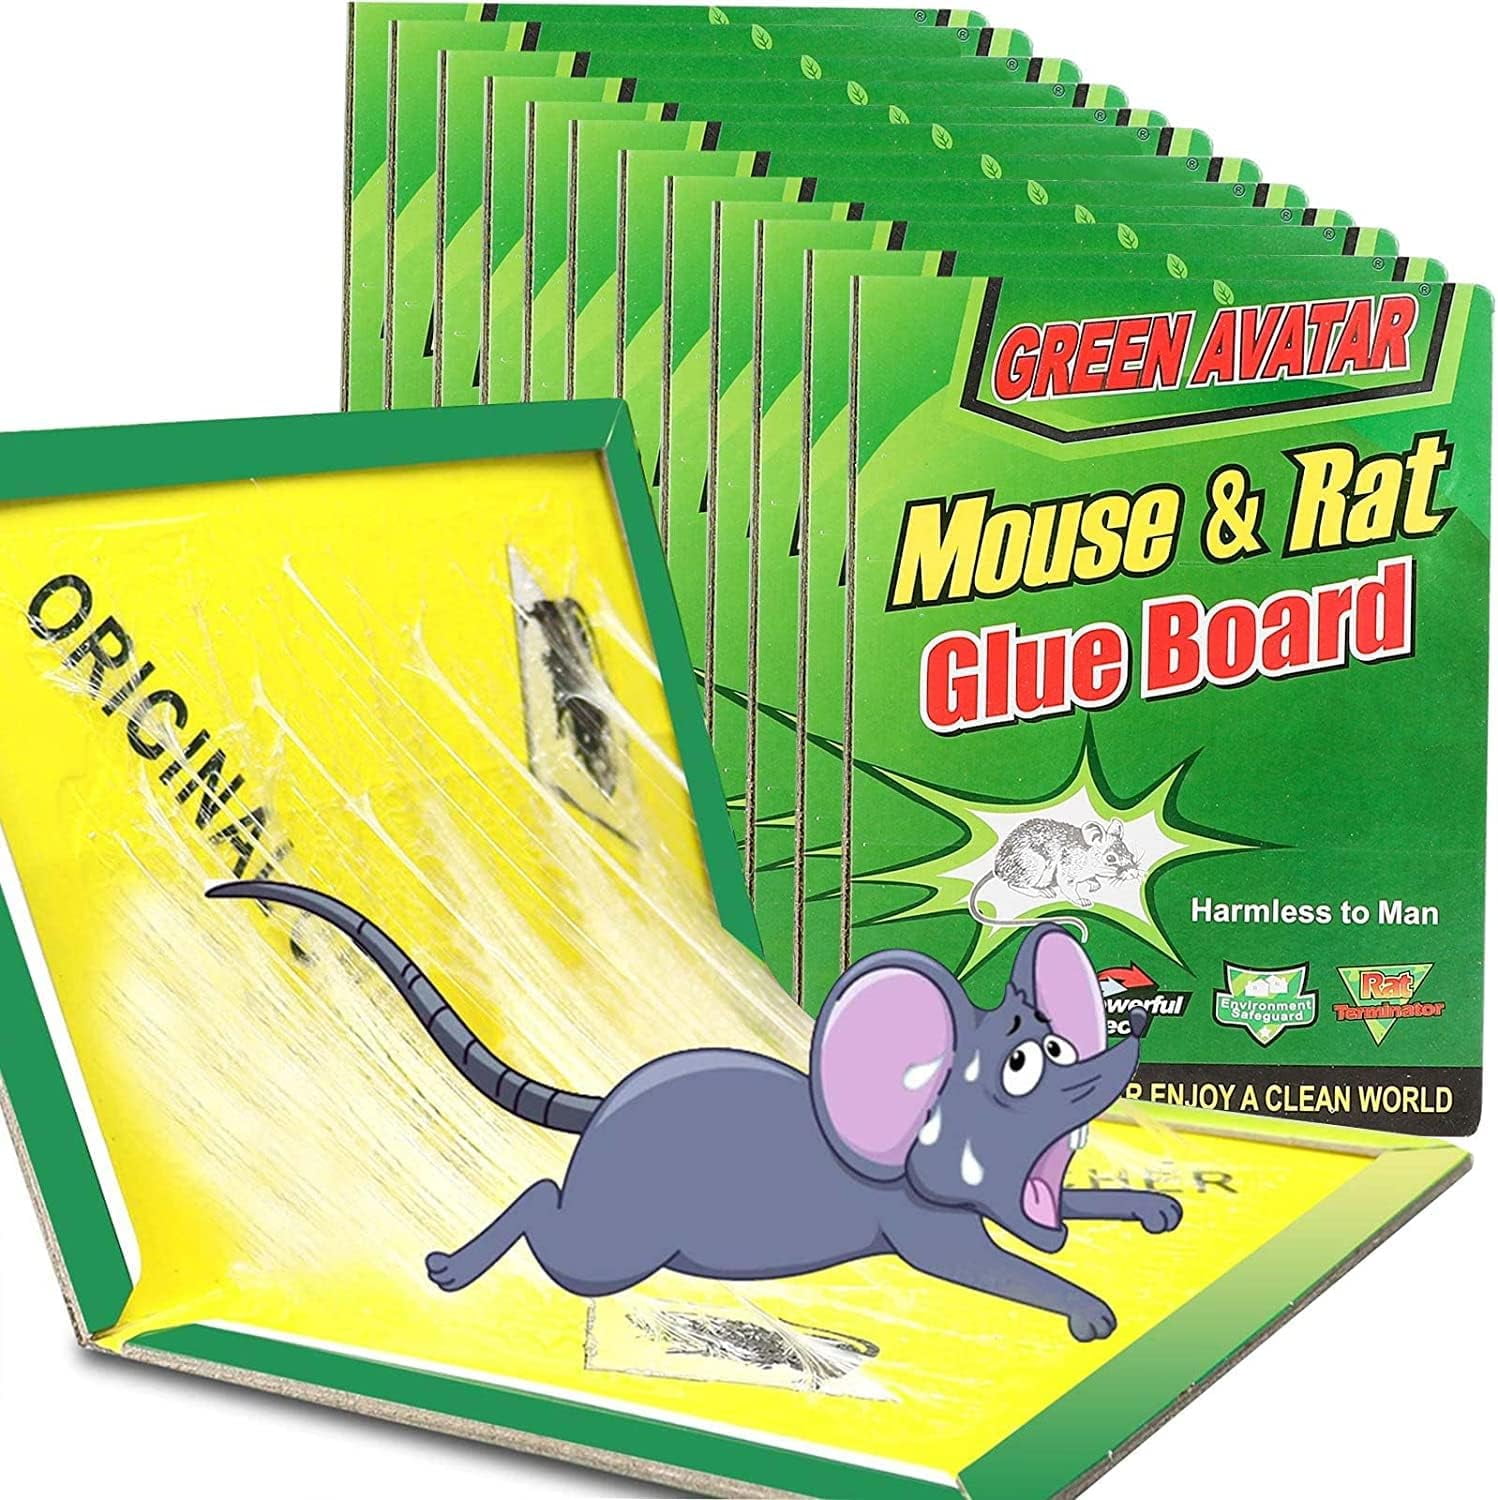 Mouse & Insect Glue Trap, Mouse Traps Indoor For Home, Sticky Pest